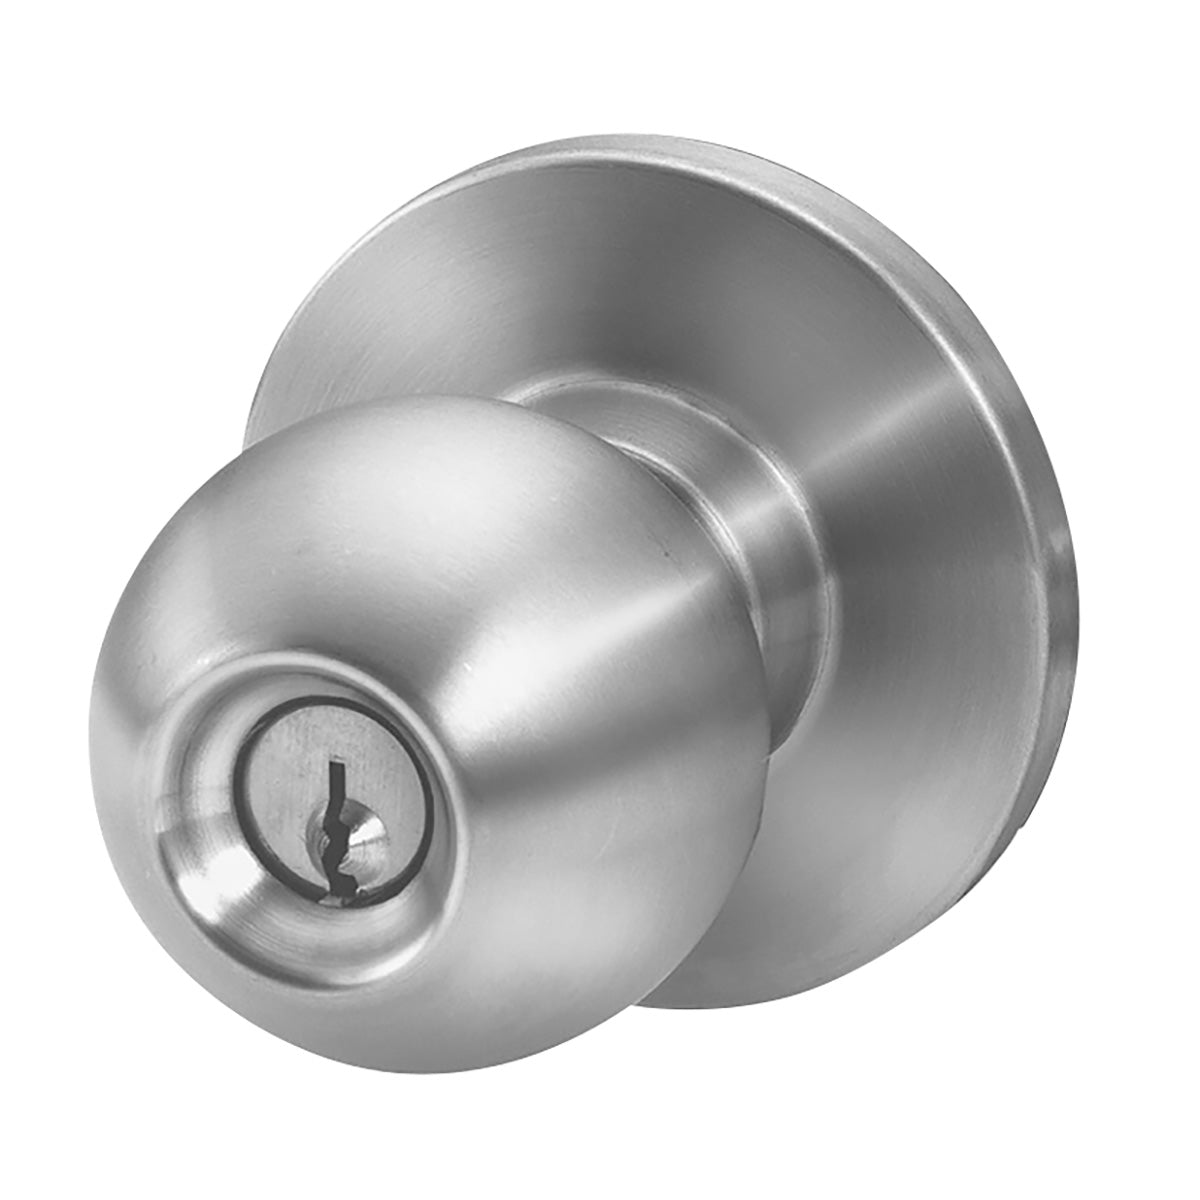 York Commercial Keyed Entry Knob, Satin Stainless Steel